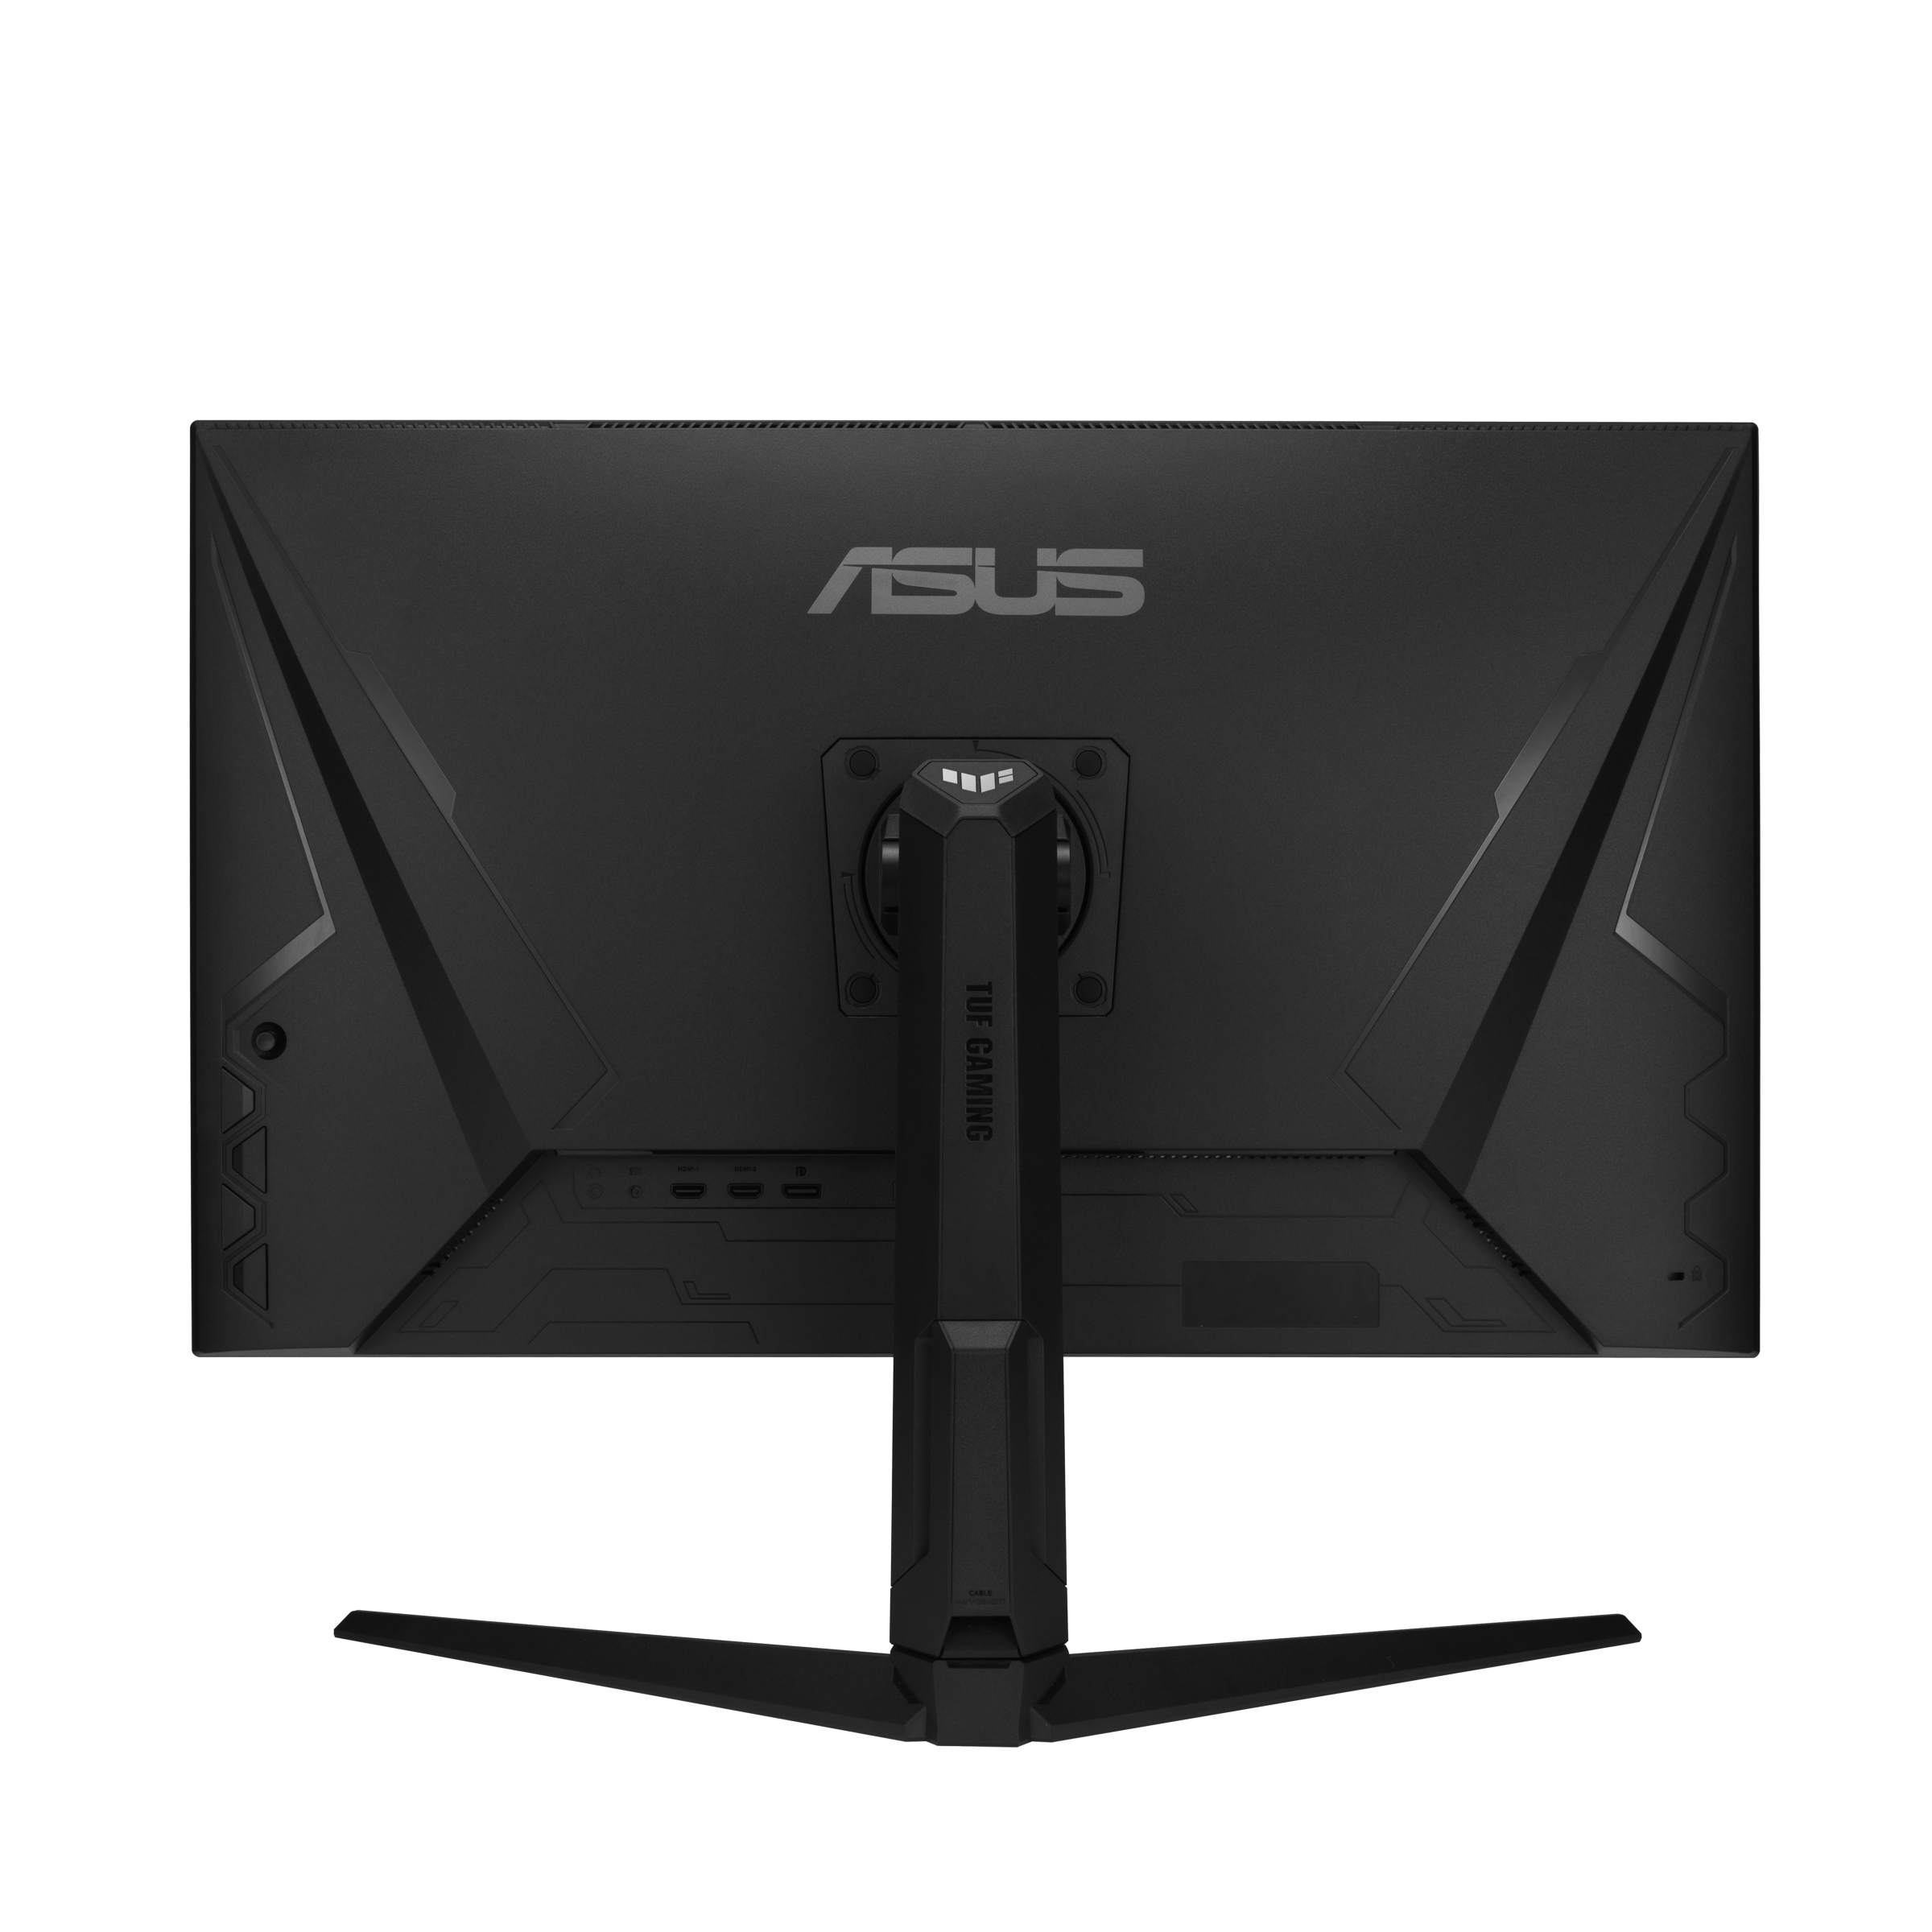 Media asset in full size related to 3dfxzone.it news item entitled as follows: ASUS introduce il monitor TUF Gaming VG32AQL1A con pannello IPS QHD da 1ms | Image Name: news32277_ASUS-TUF-Gaming-VG32AQL1A_4.png